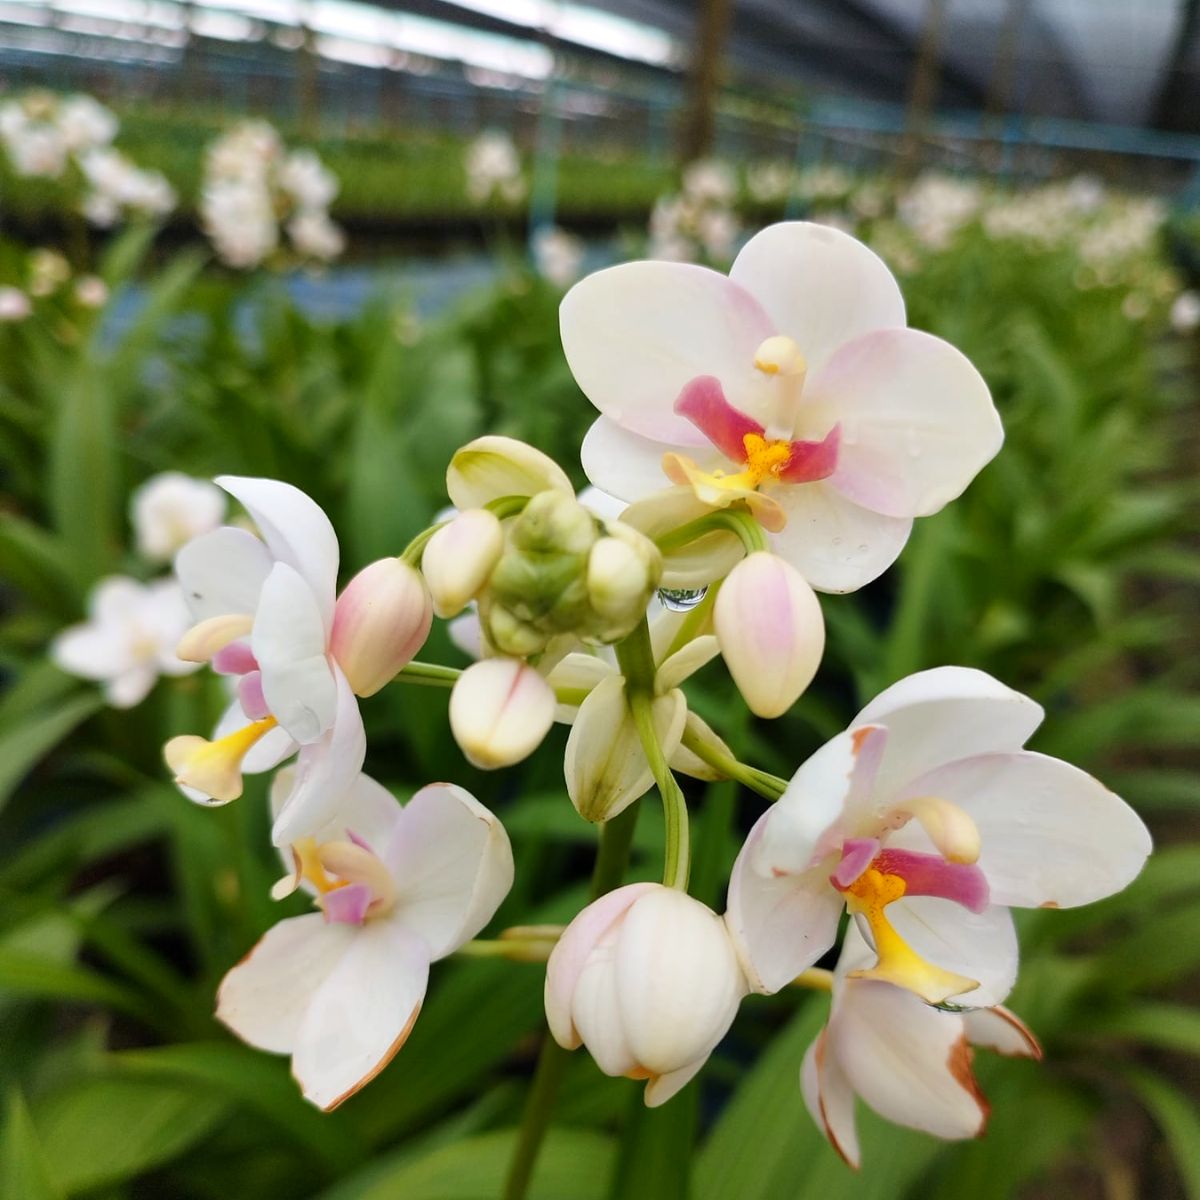 The Spathoglottis White Red Lip orchid typically features medium-sized blooms. The flowers showcase a pristine white color for the petals, with a striking red lip or labellum. The combination of white and red creates a visually striking contrast and adds a touch of elegance to the flower.